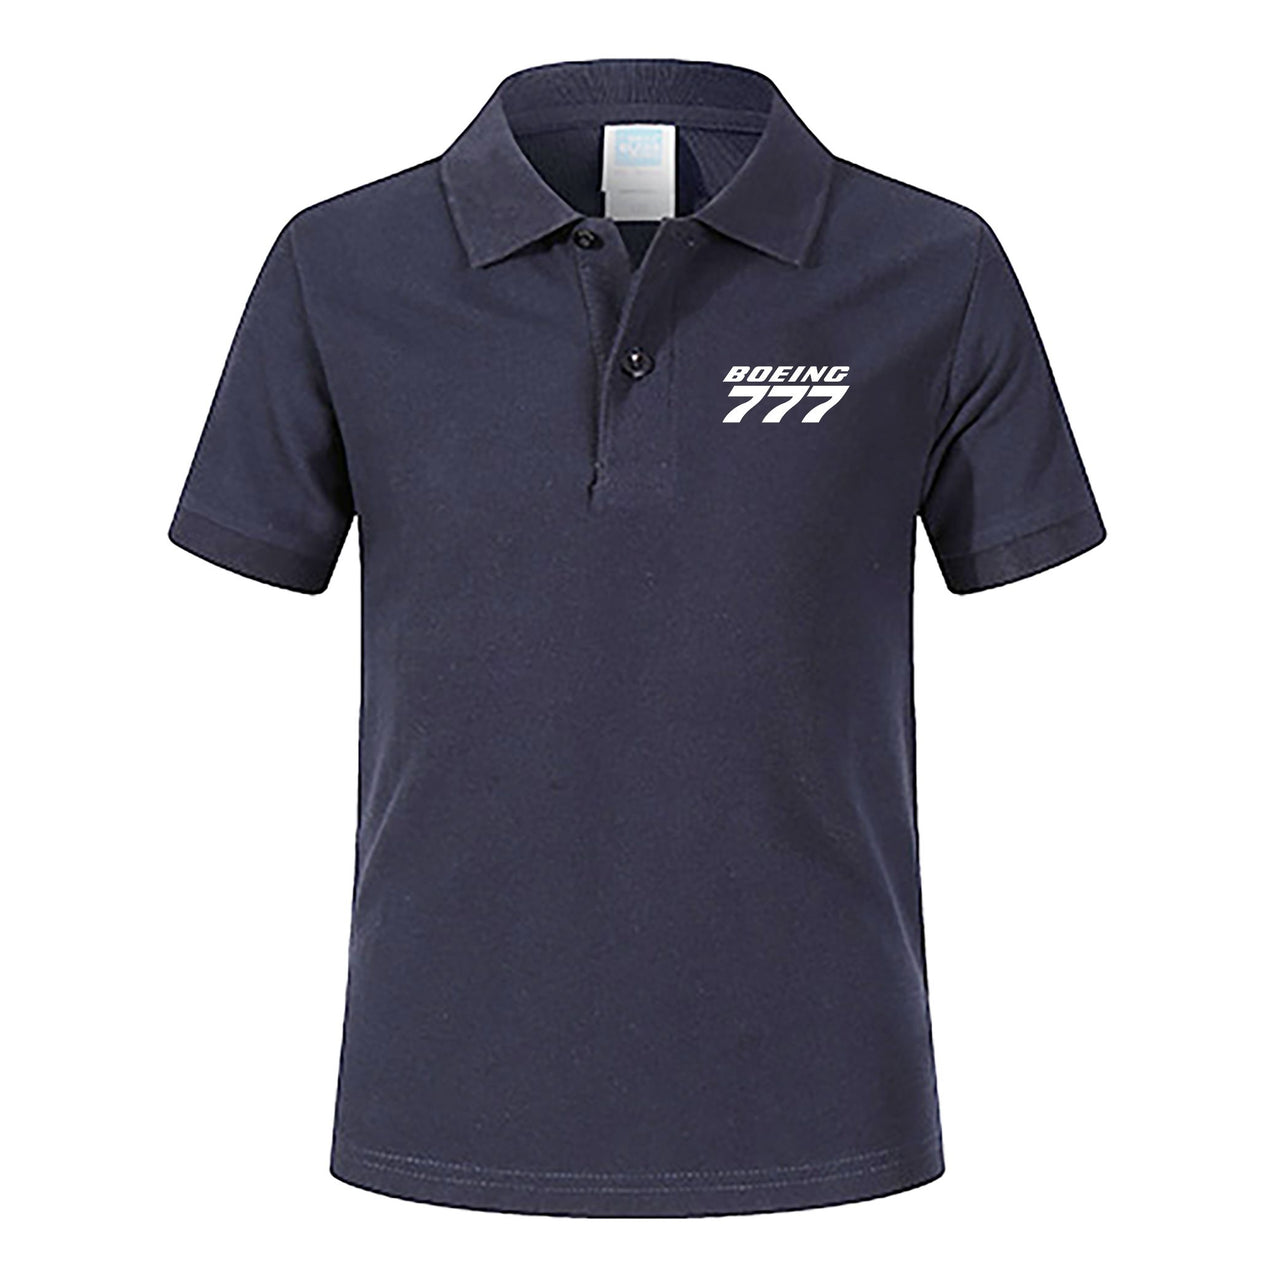 Boeing 777 & Text Designed Children Polo T-Shirts